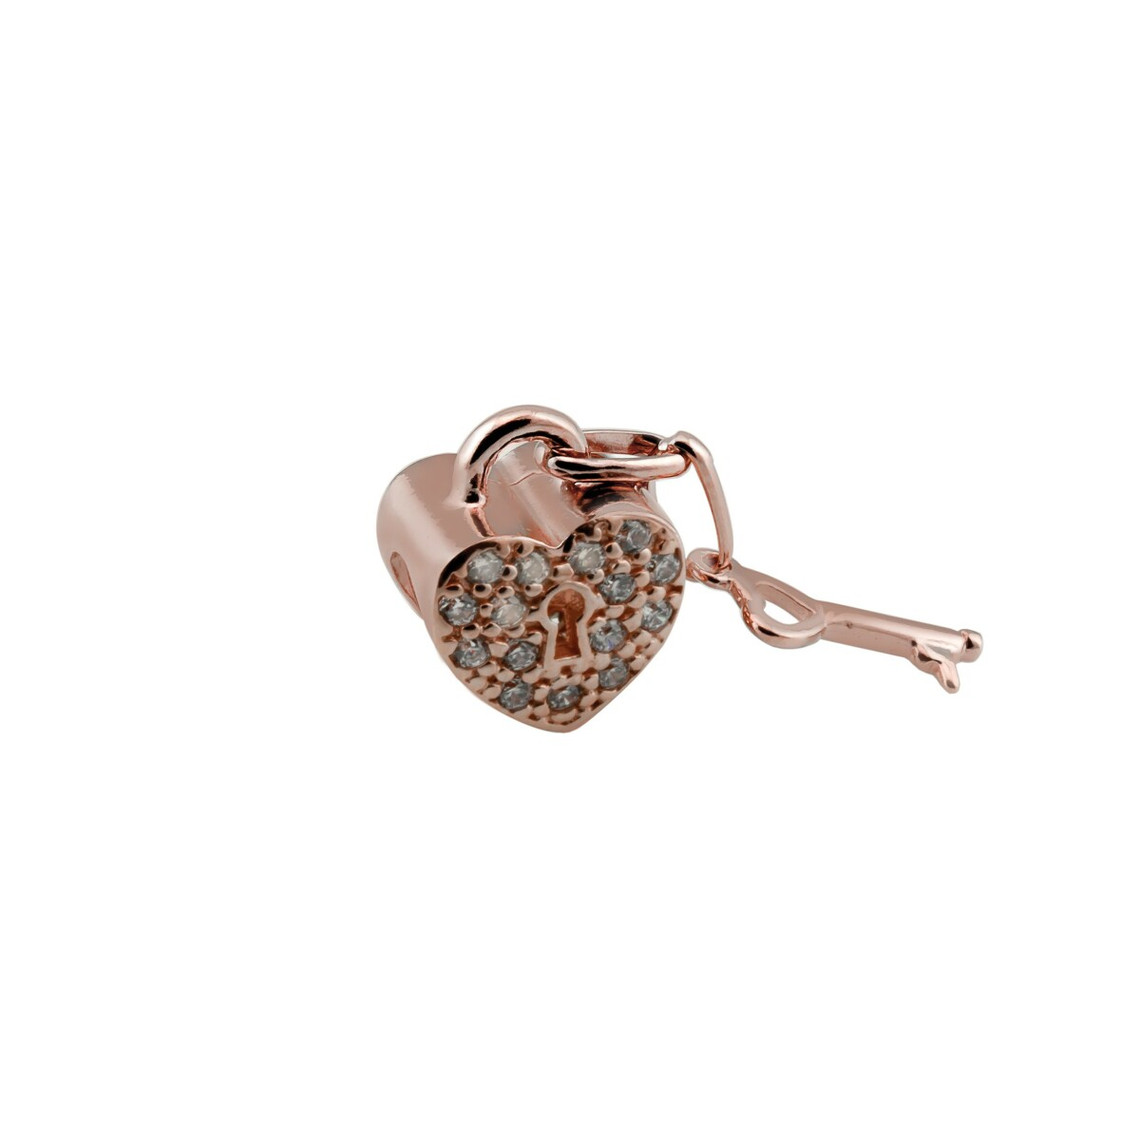 charms amore & baci rp2b019 perles argent rose 925/1000 femme